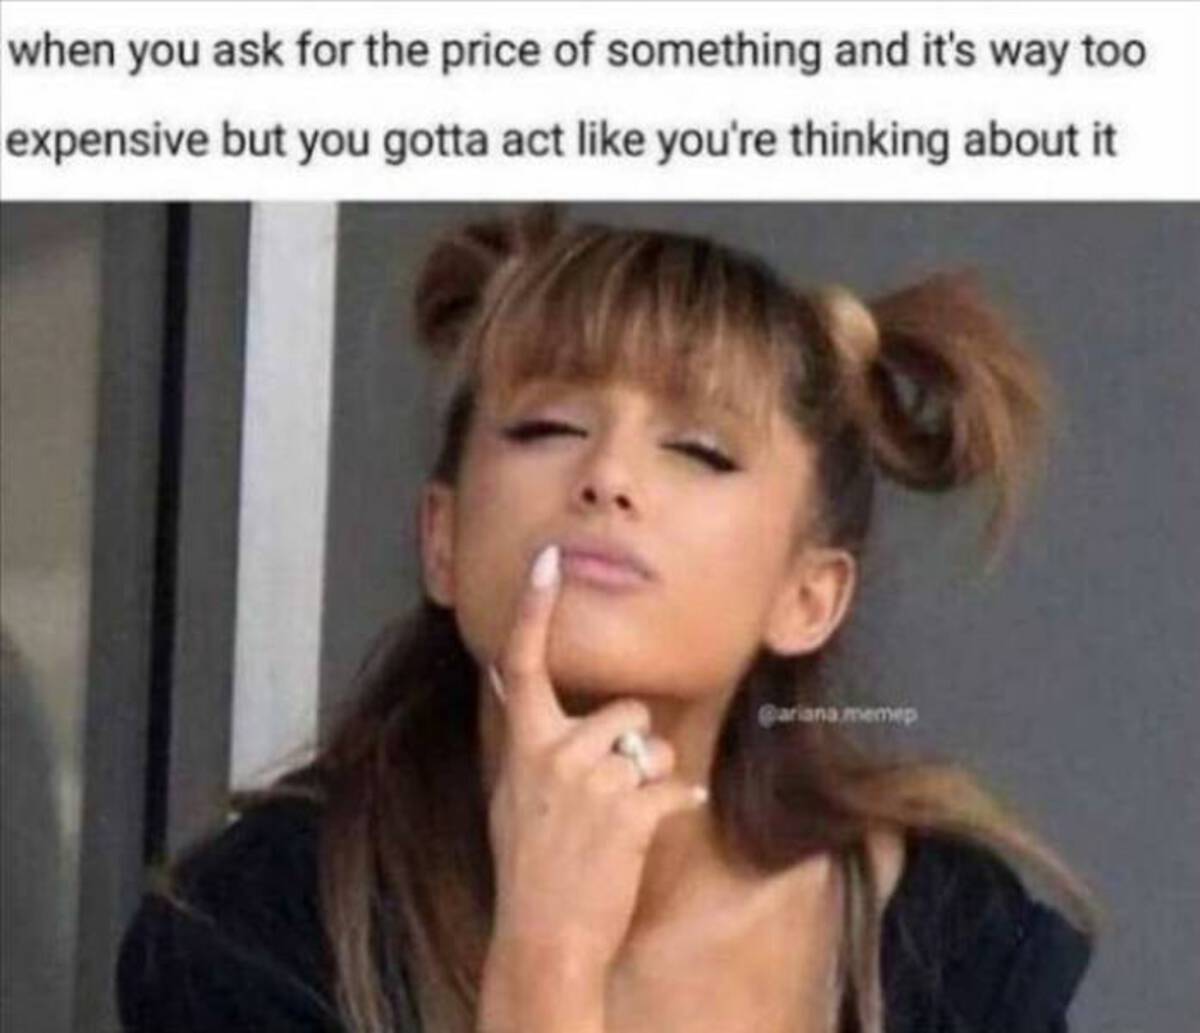 broke meme - when you ask for the price of something and it's way too expensive but you gotta act you're thinking about it memep